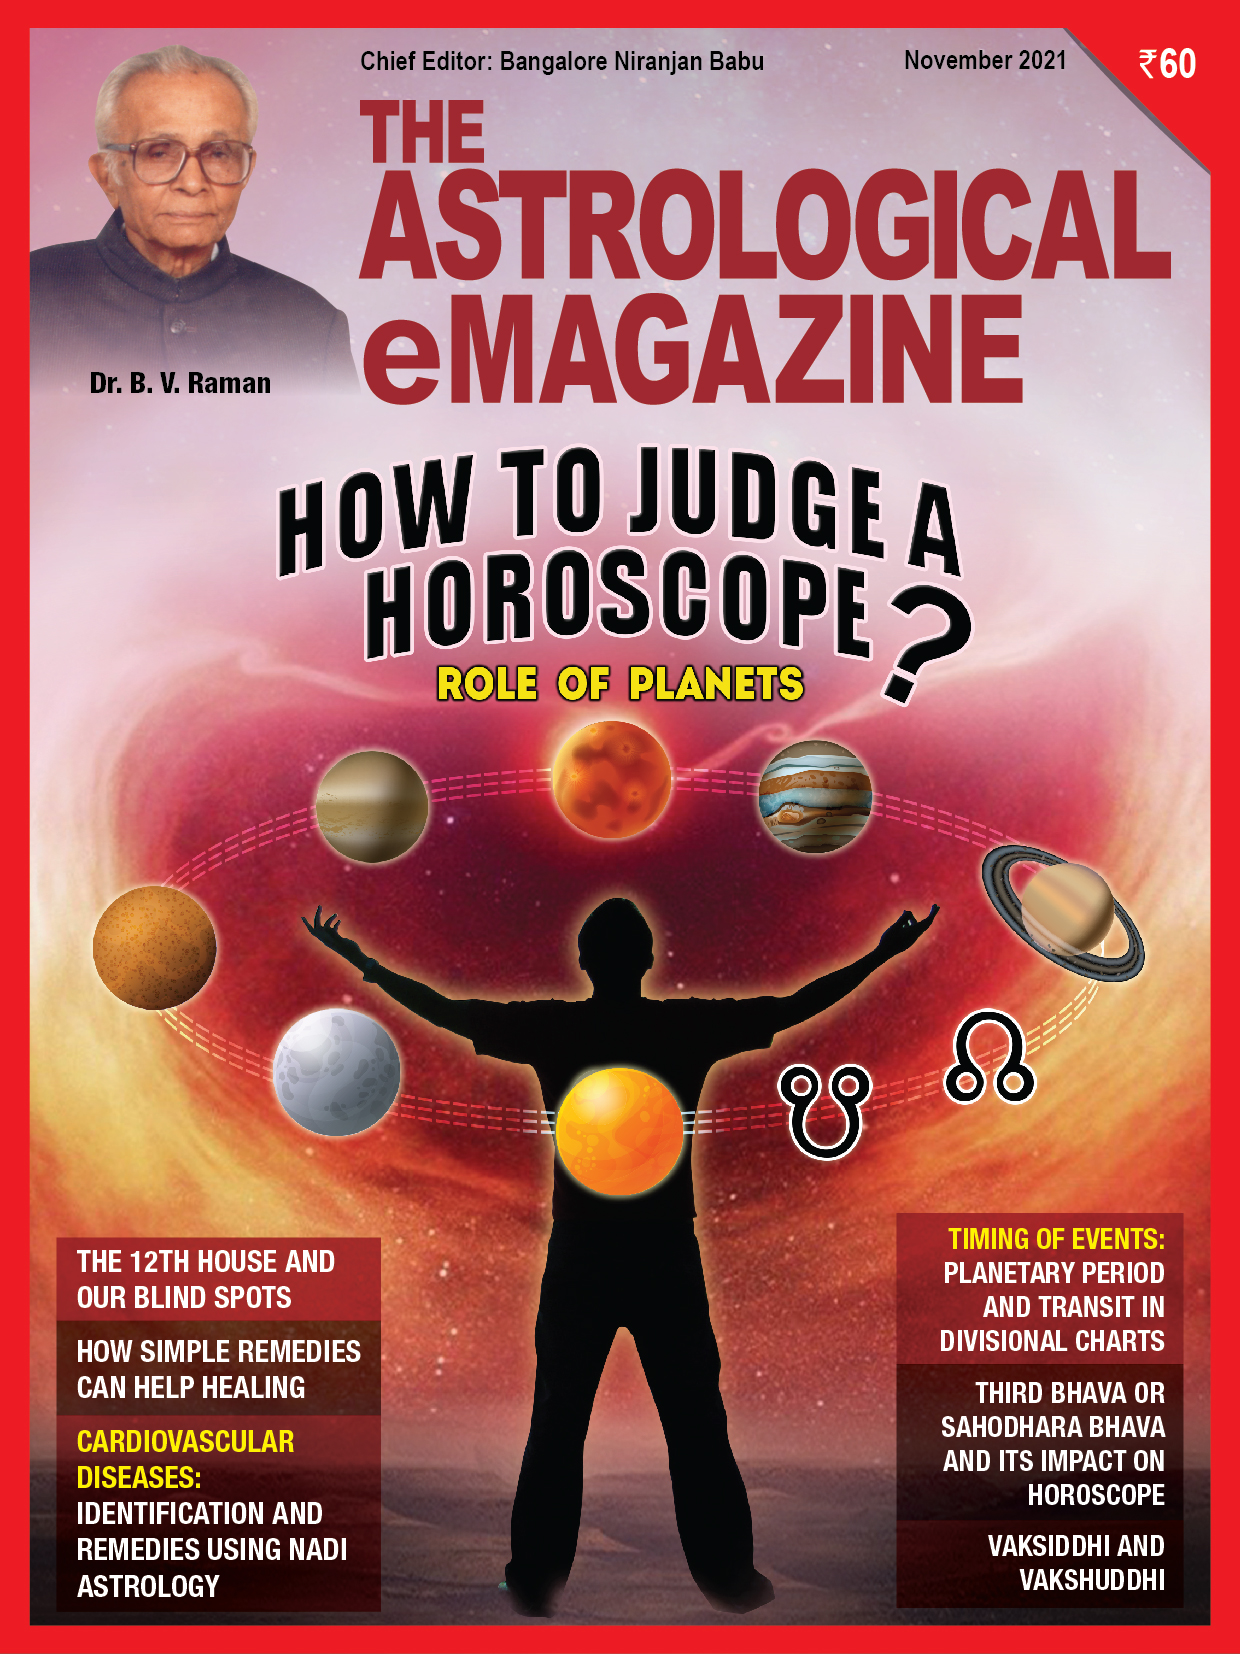 December 2021 issue of The Astrological eMagazine